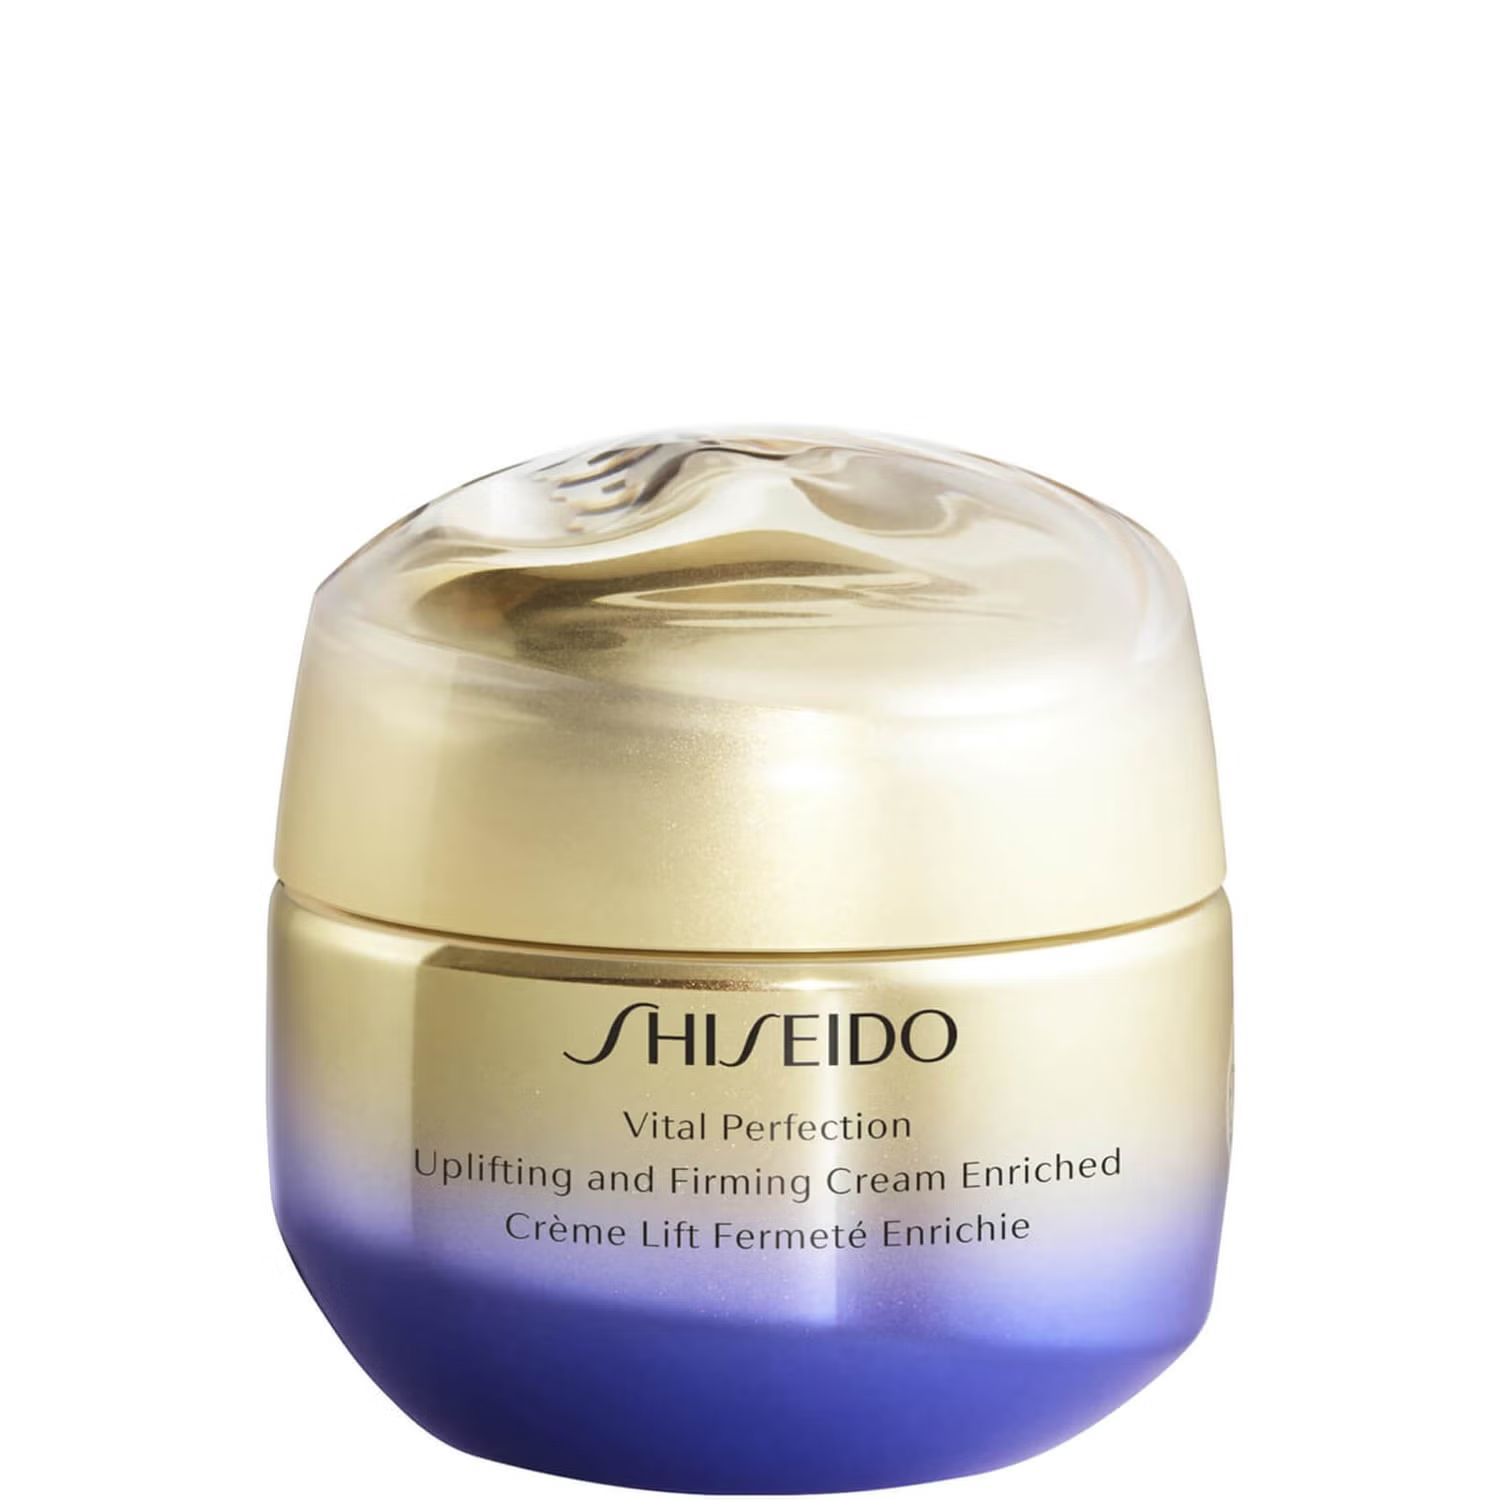 Shiseido Vital Perfection Uplifting and Firming Cream Enriched | Look Fantastic (ROW)